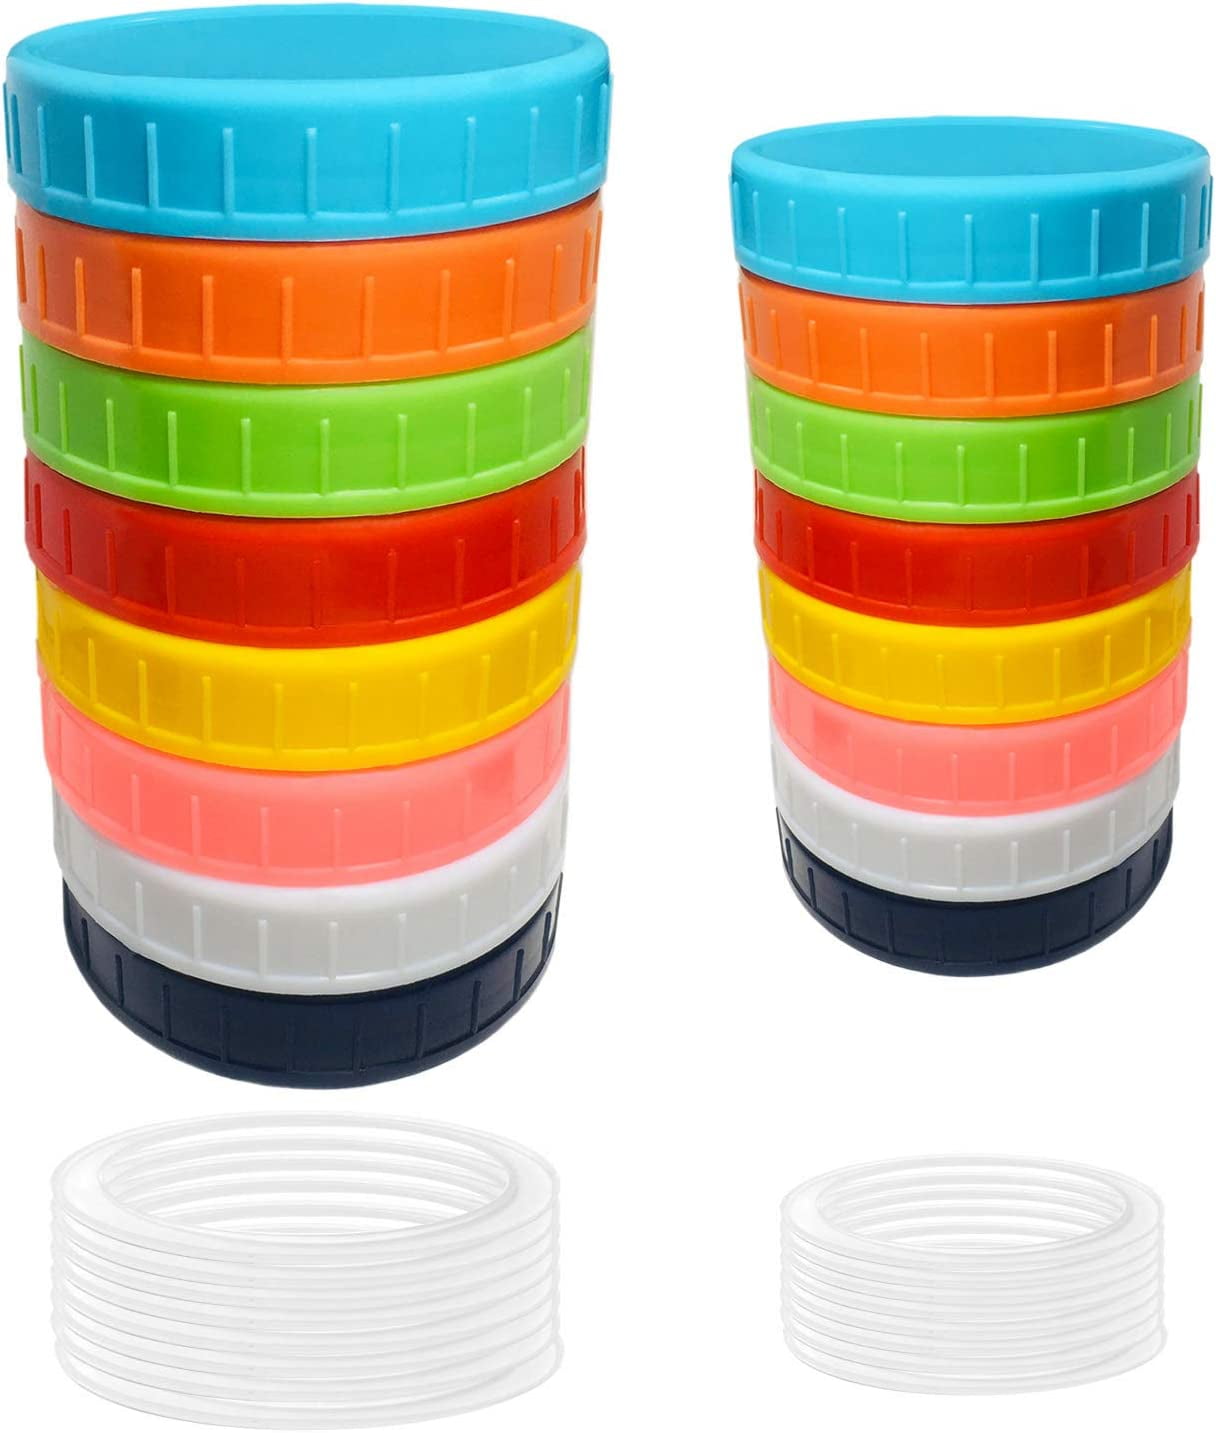 16 Pack Colored Plastic Mason Jar Lids Ball Jar Lids Kerr 8 Regular Mouth And 8 Wide Mouth